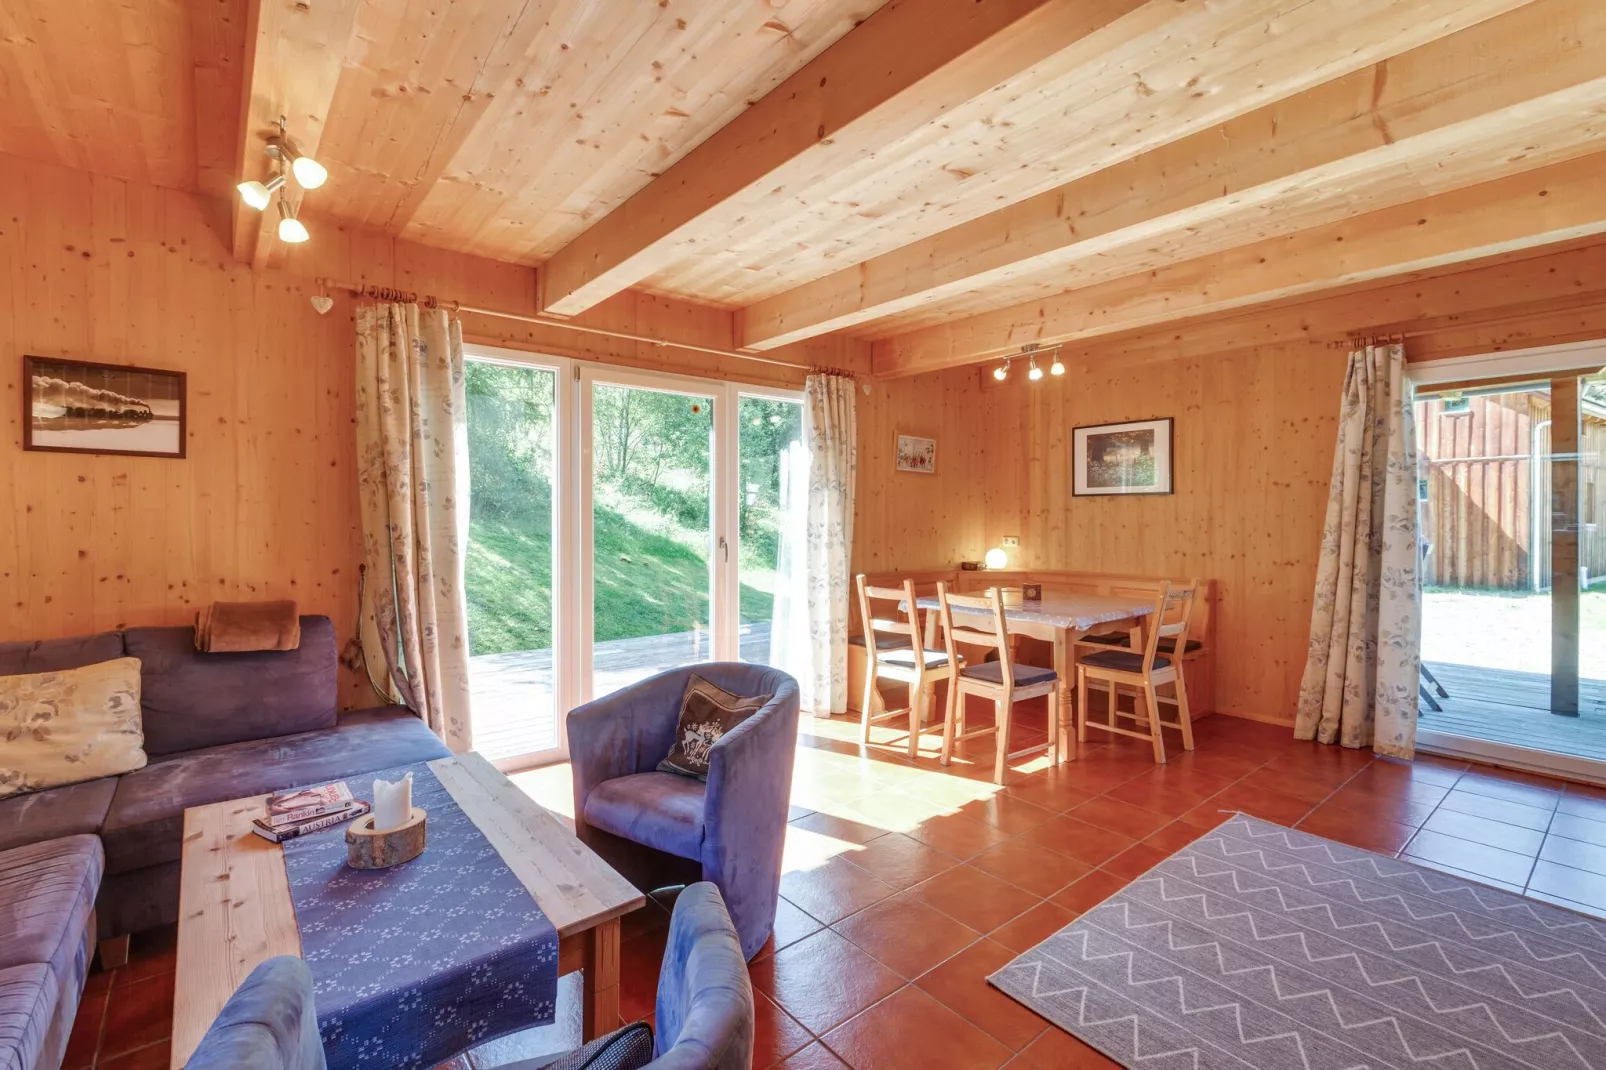 Chalet4You-Woonkamer